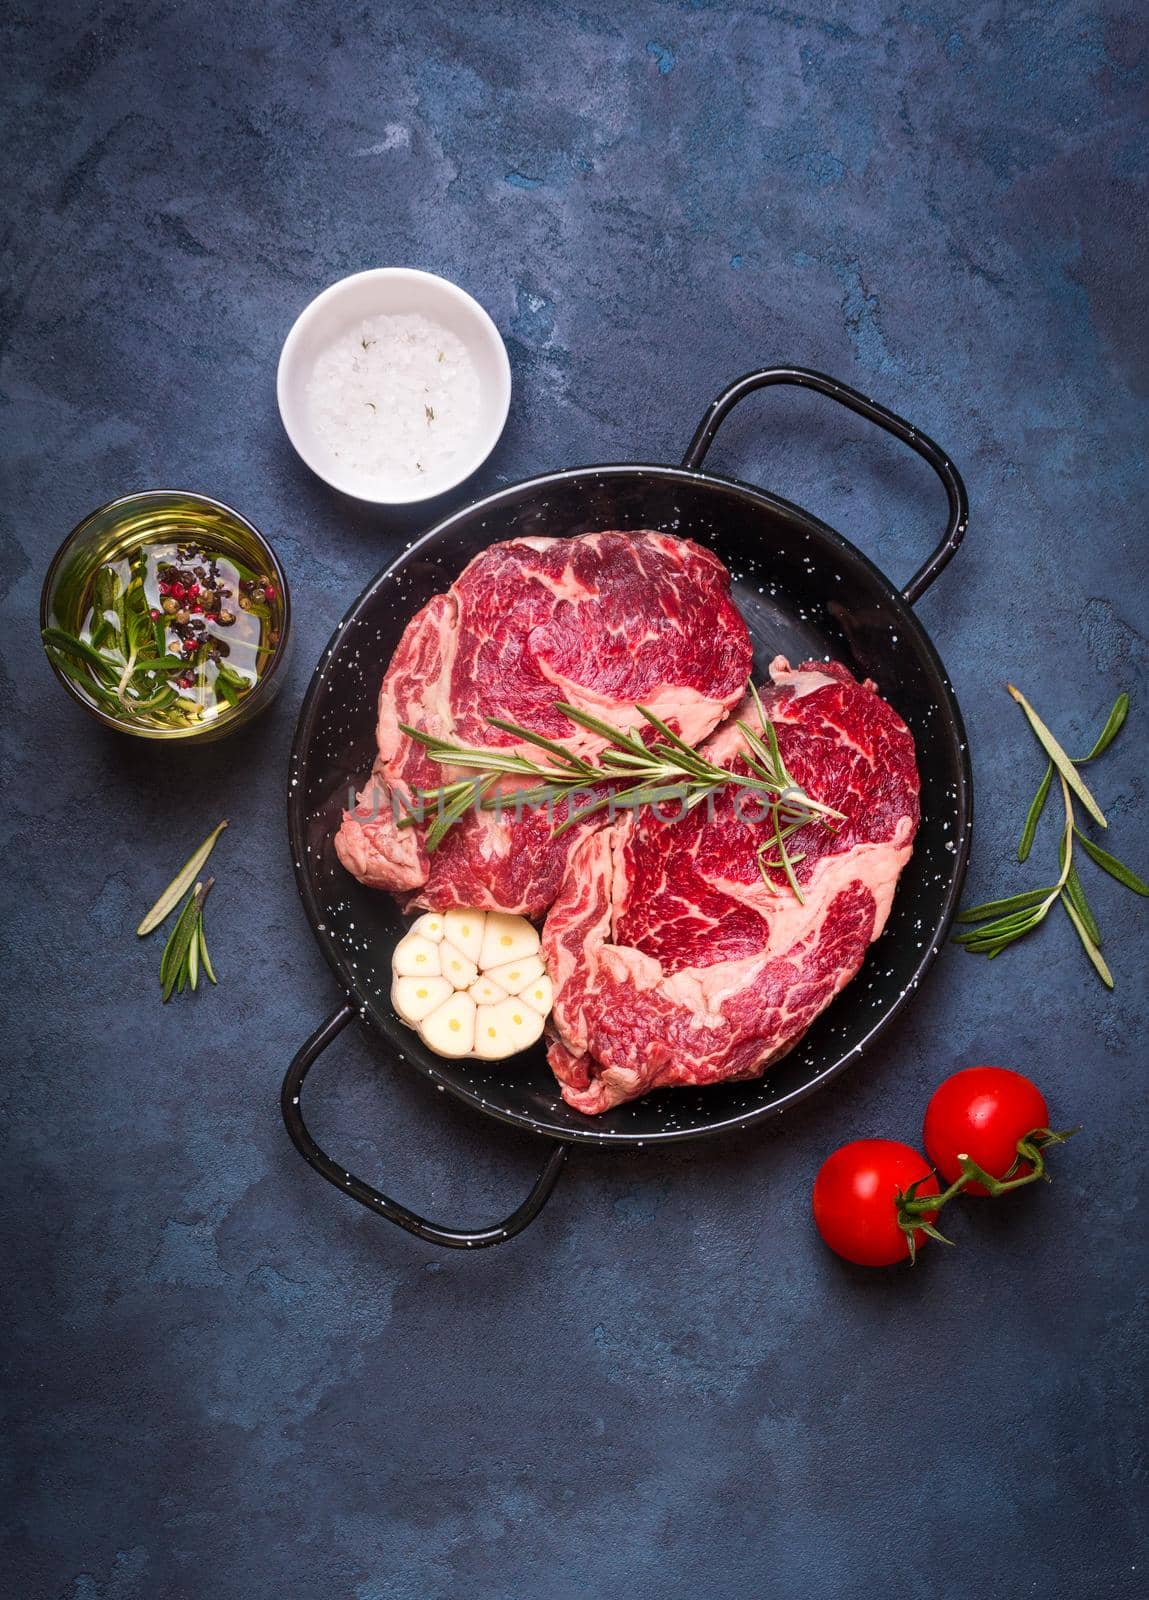 Raw juicy steaks with seasonings in a black pan ready for roasting on rustic concrete background. Fresh marbled meat steaks with herbs, garlic, olive oil, pepper, salt and tomatoes. Top view